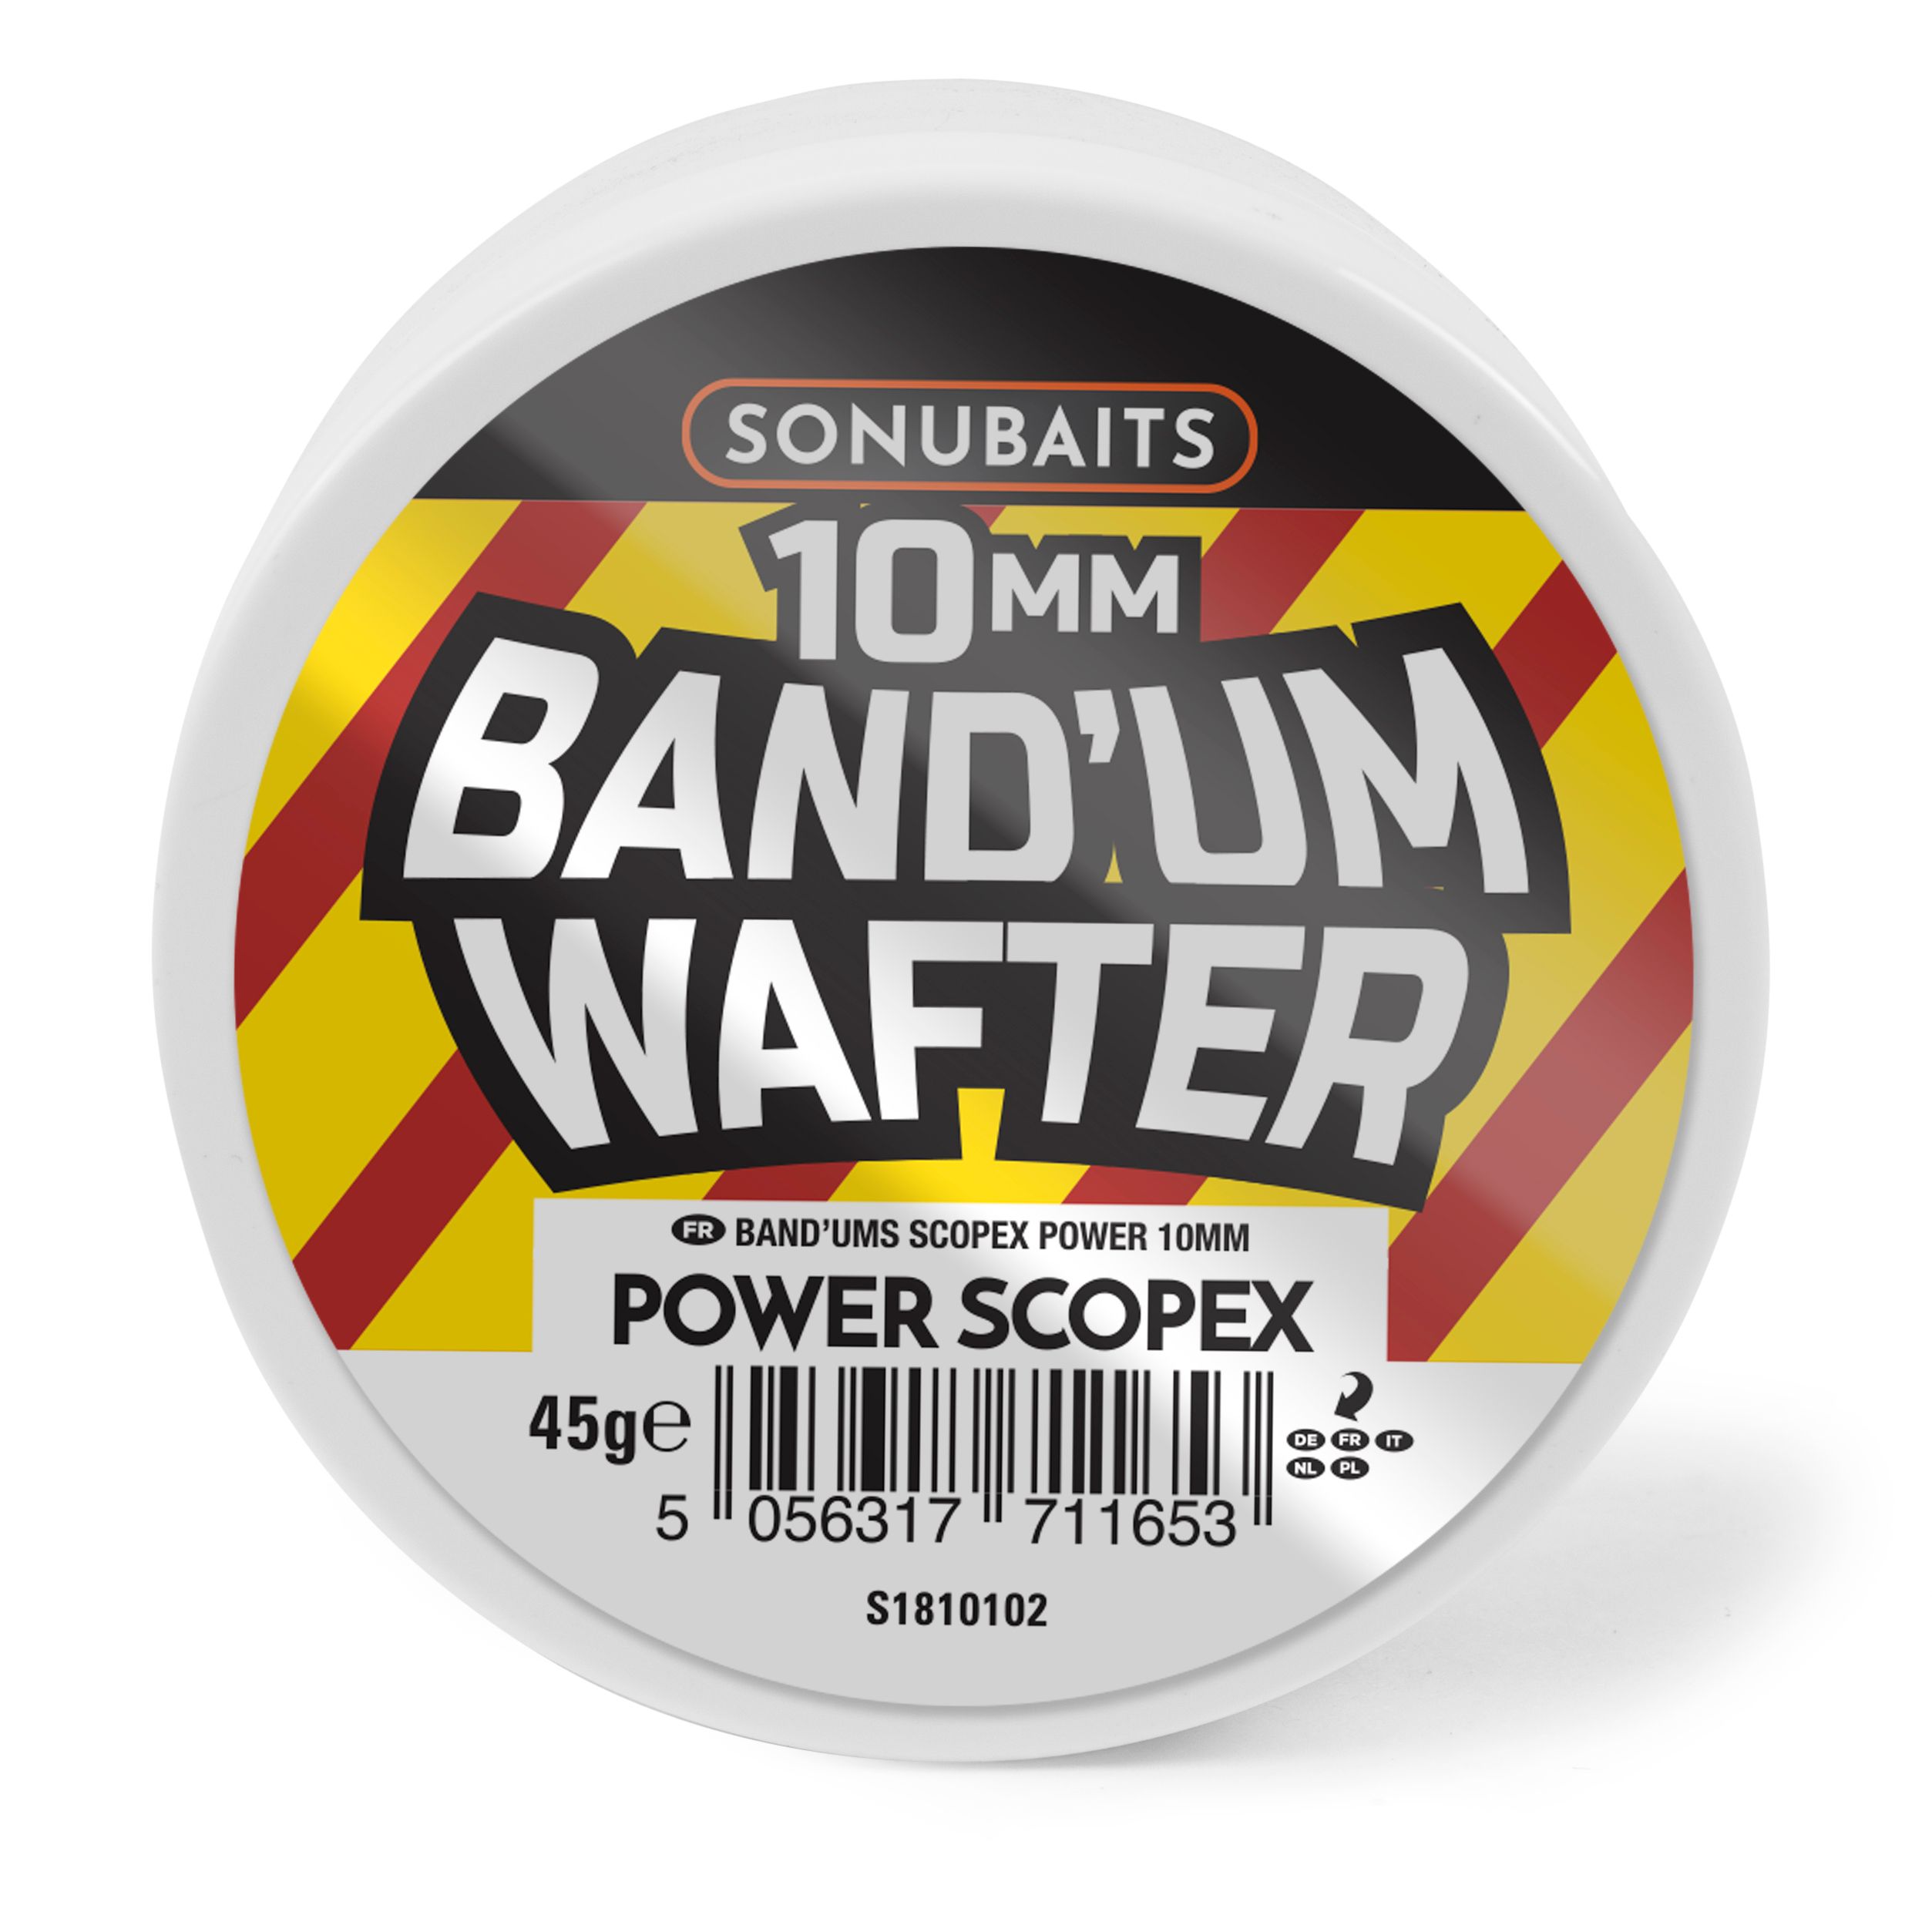 Sonubaits Band'um Wafters Power Scopex 10mm